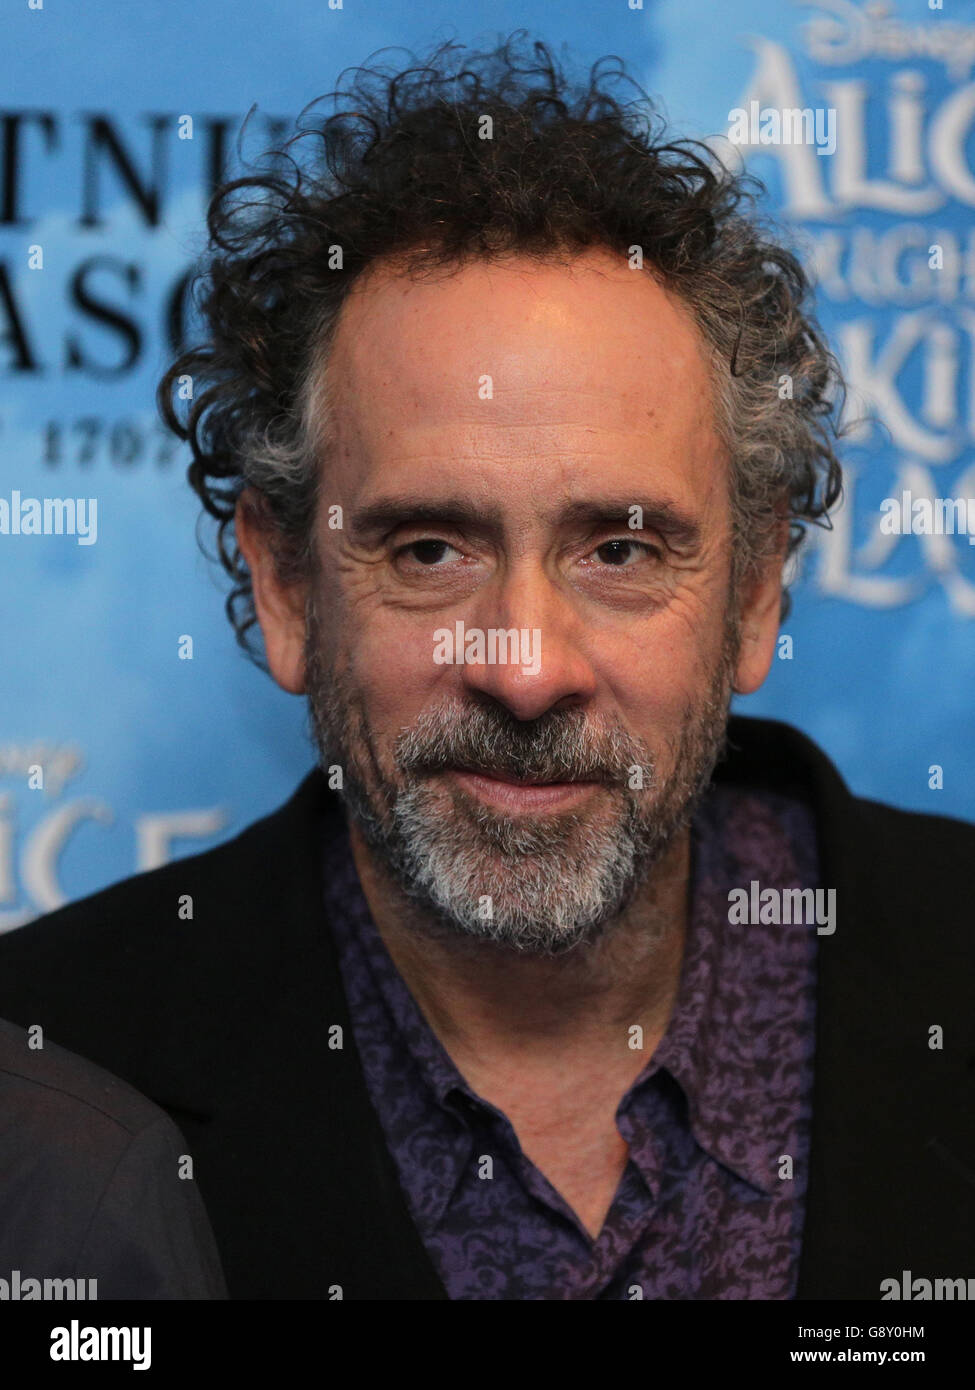 Tim Burton attending the Alice Through The Looking Glass European premiere, at the Odeon Leicester Square, London. PRESS ASSOCIATION Photo. Picture date: Tuesday May 10, 2016. See PA Story SHOWBIZ Alice. Photo credit should read: Daniel Leal-Olivas/PA Wire Stock Photo